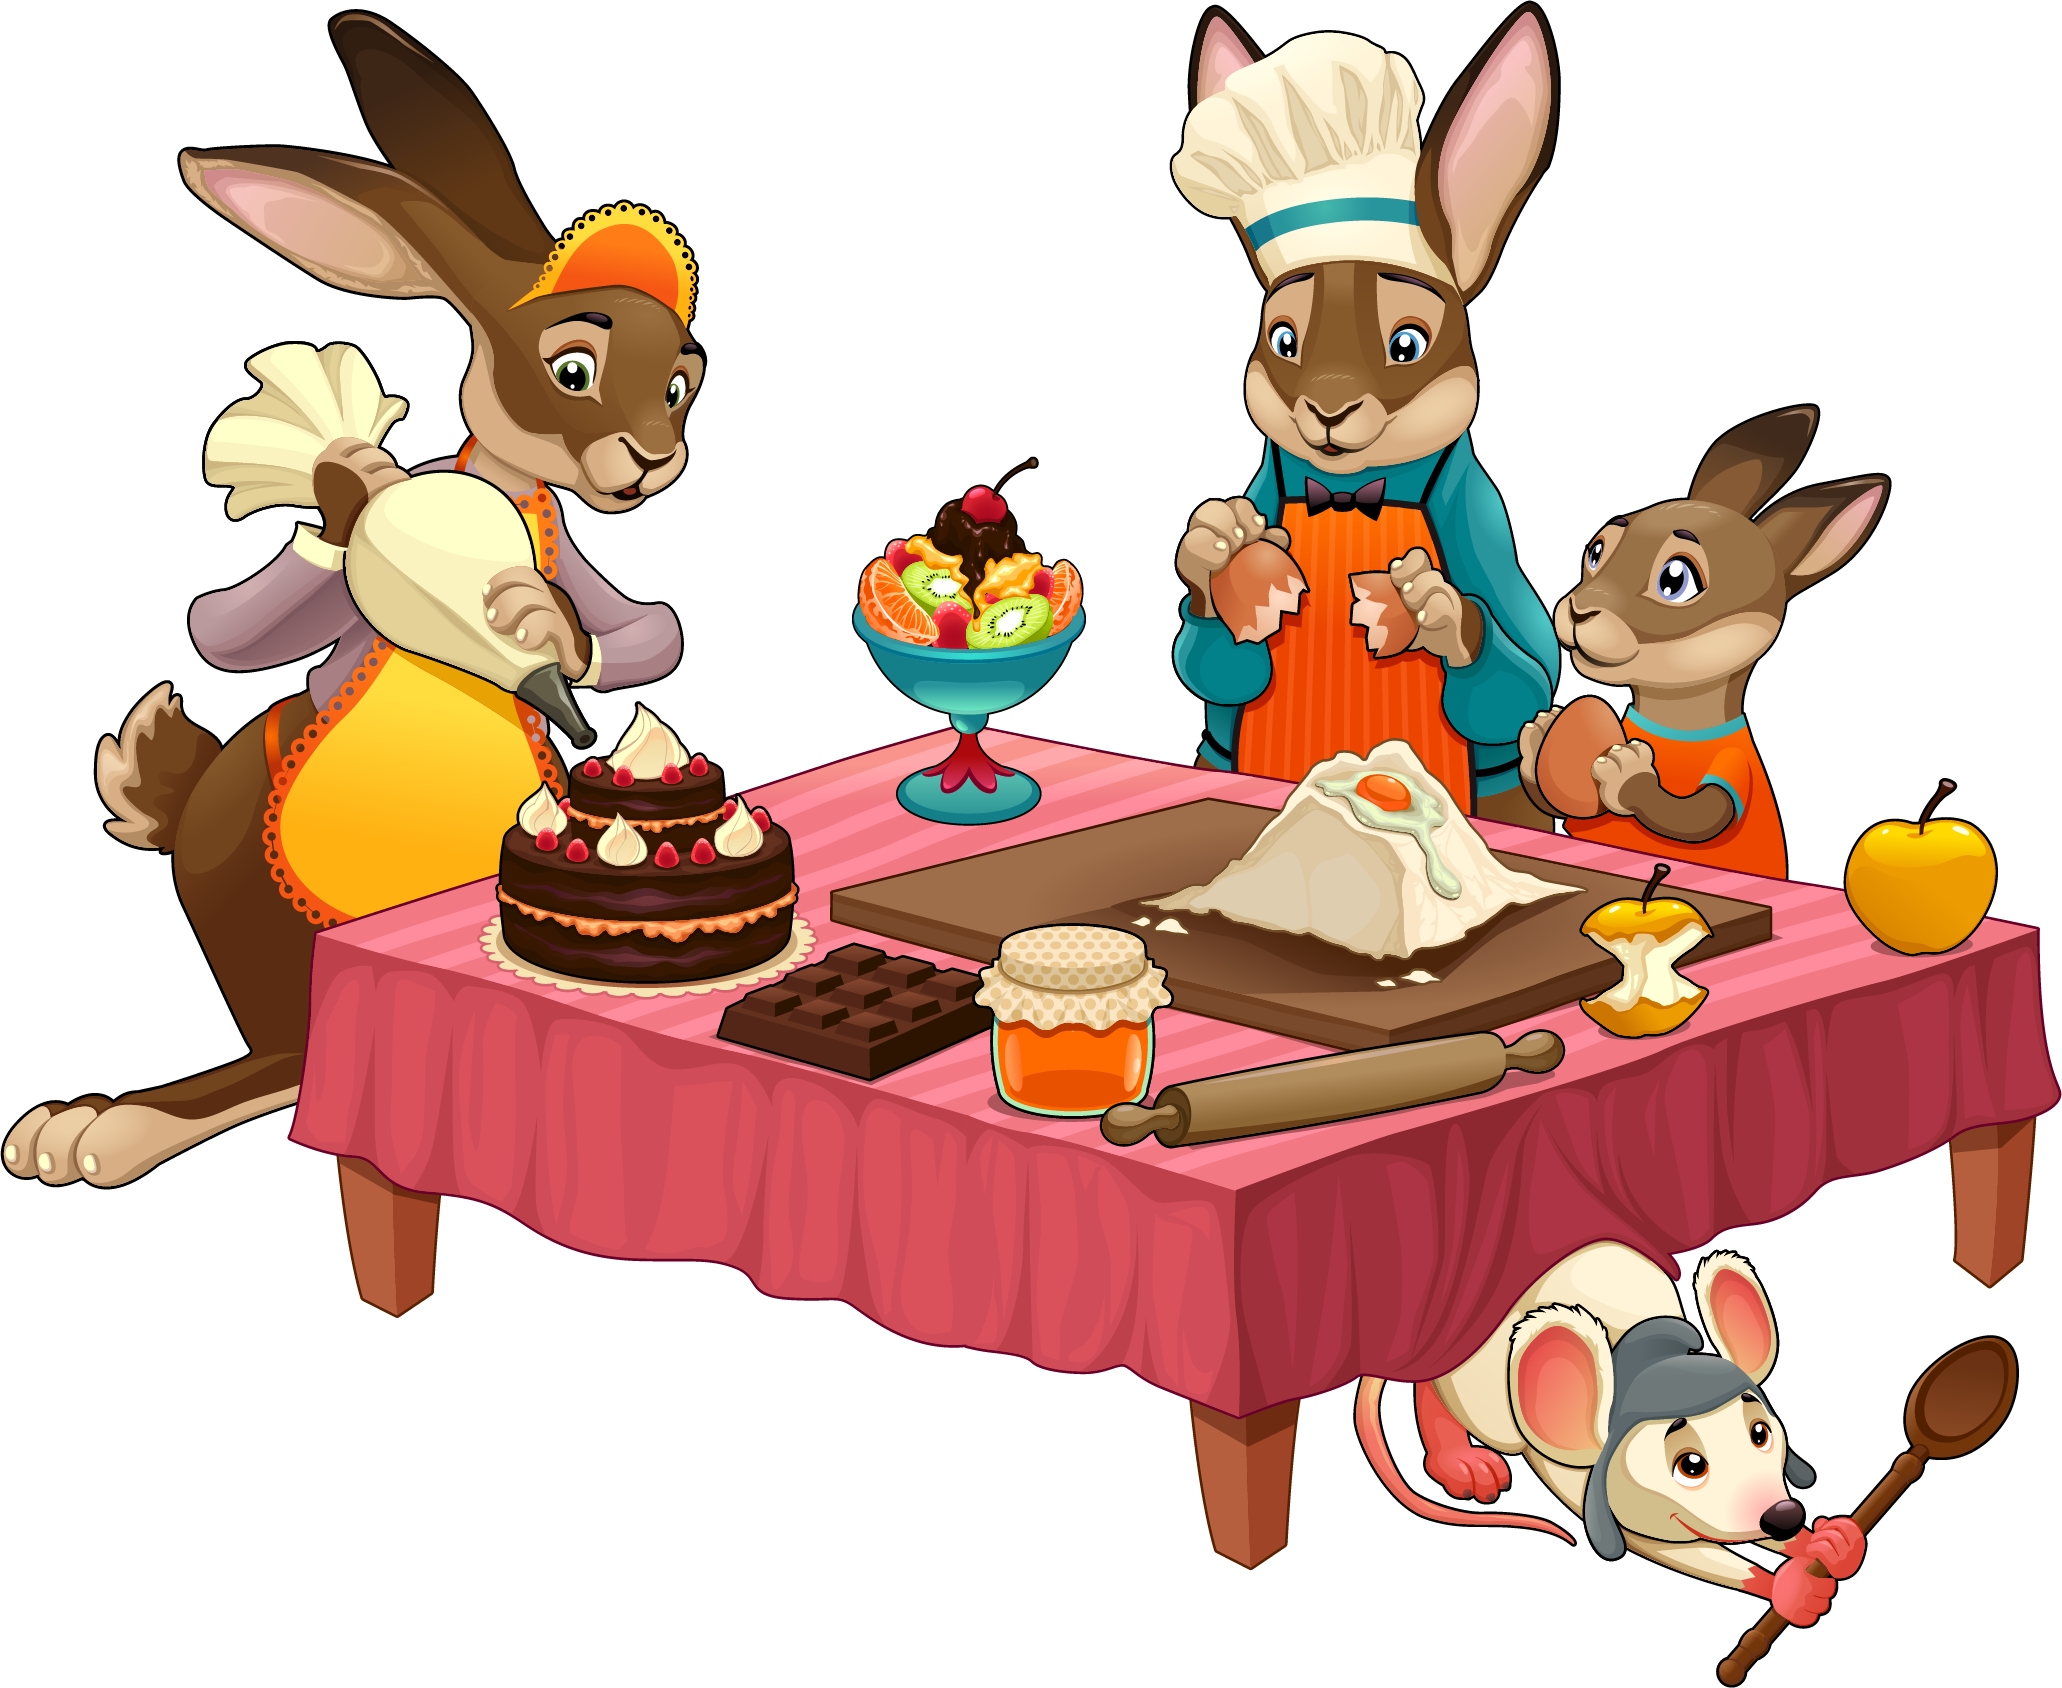 Candy Apple Cooking Rabbit Illustration - Candy Apple Cooking Rabbit Illustration (2062x1688)